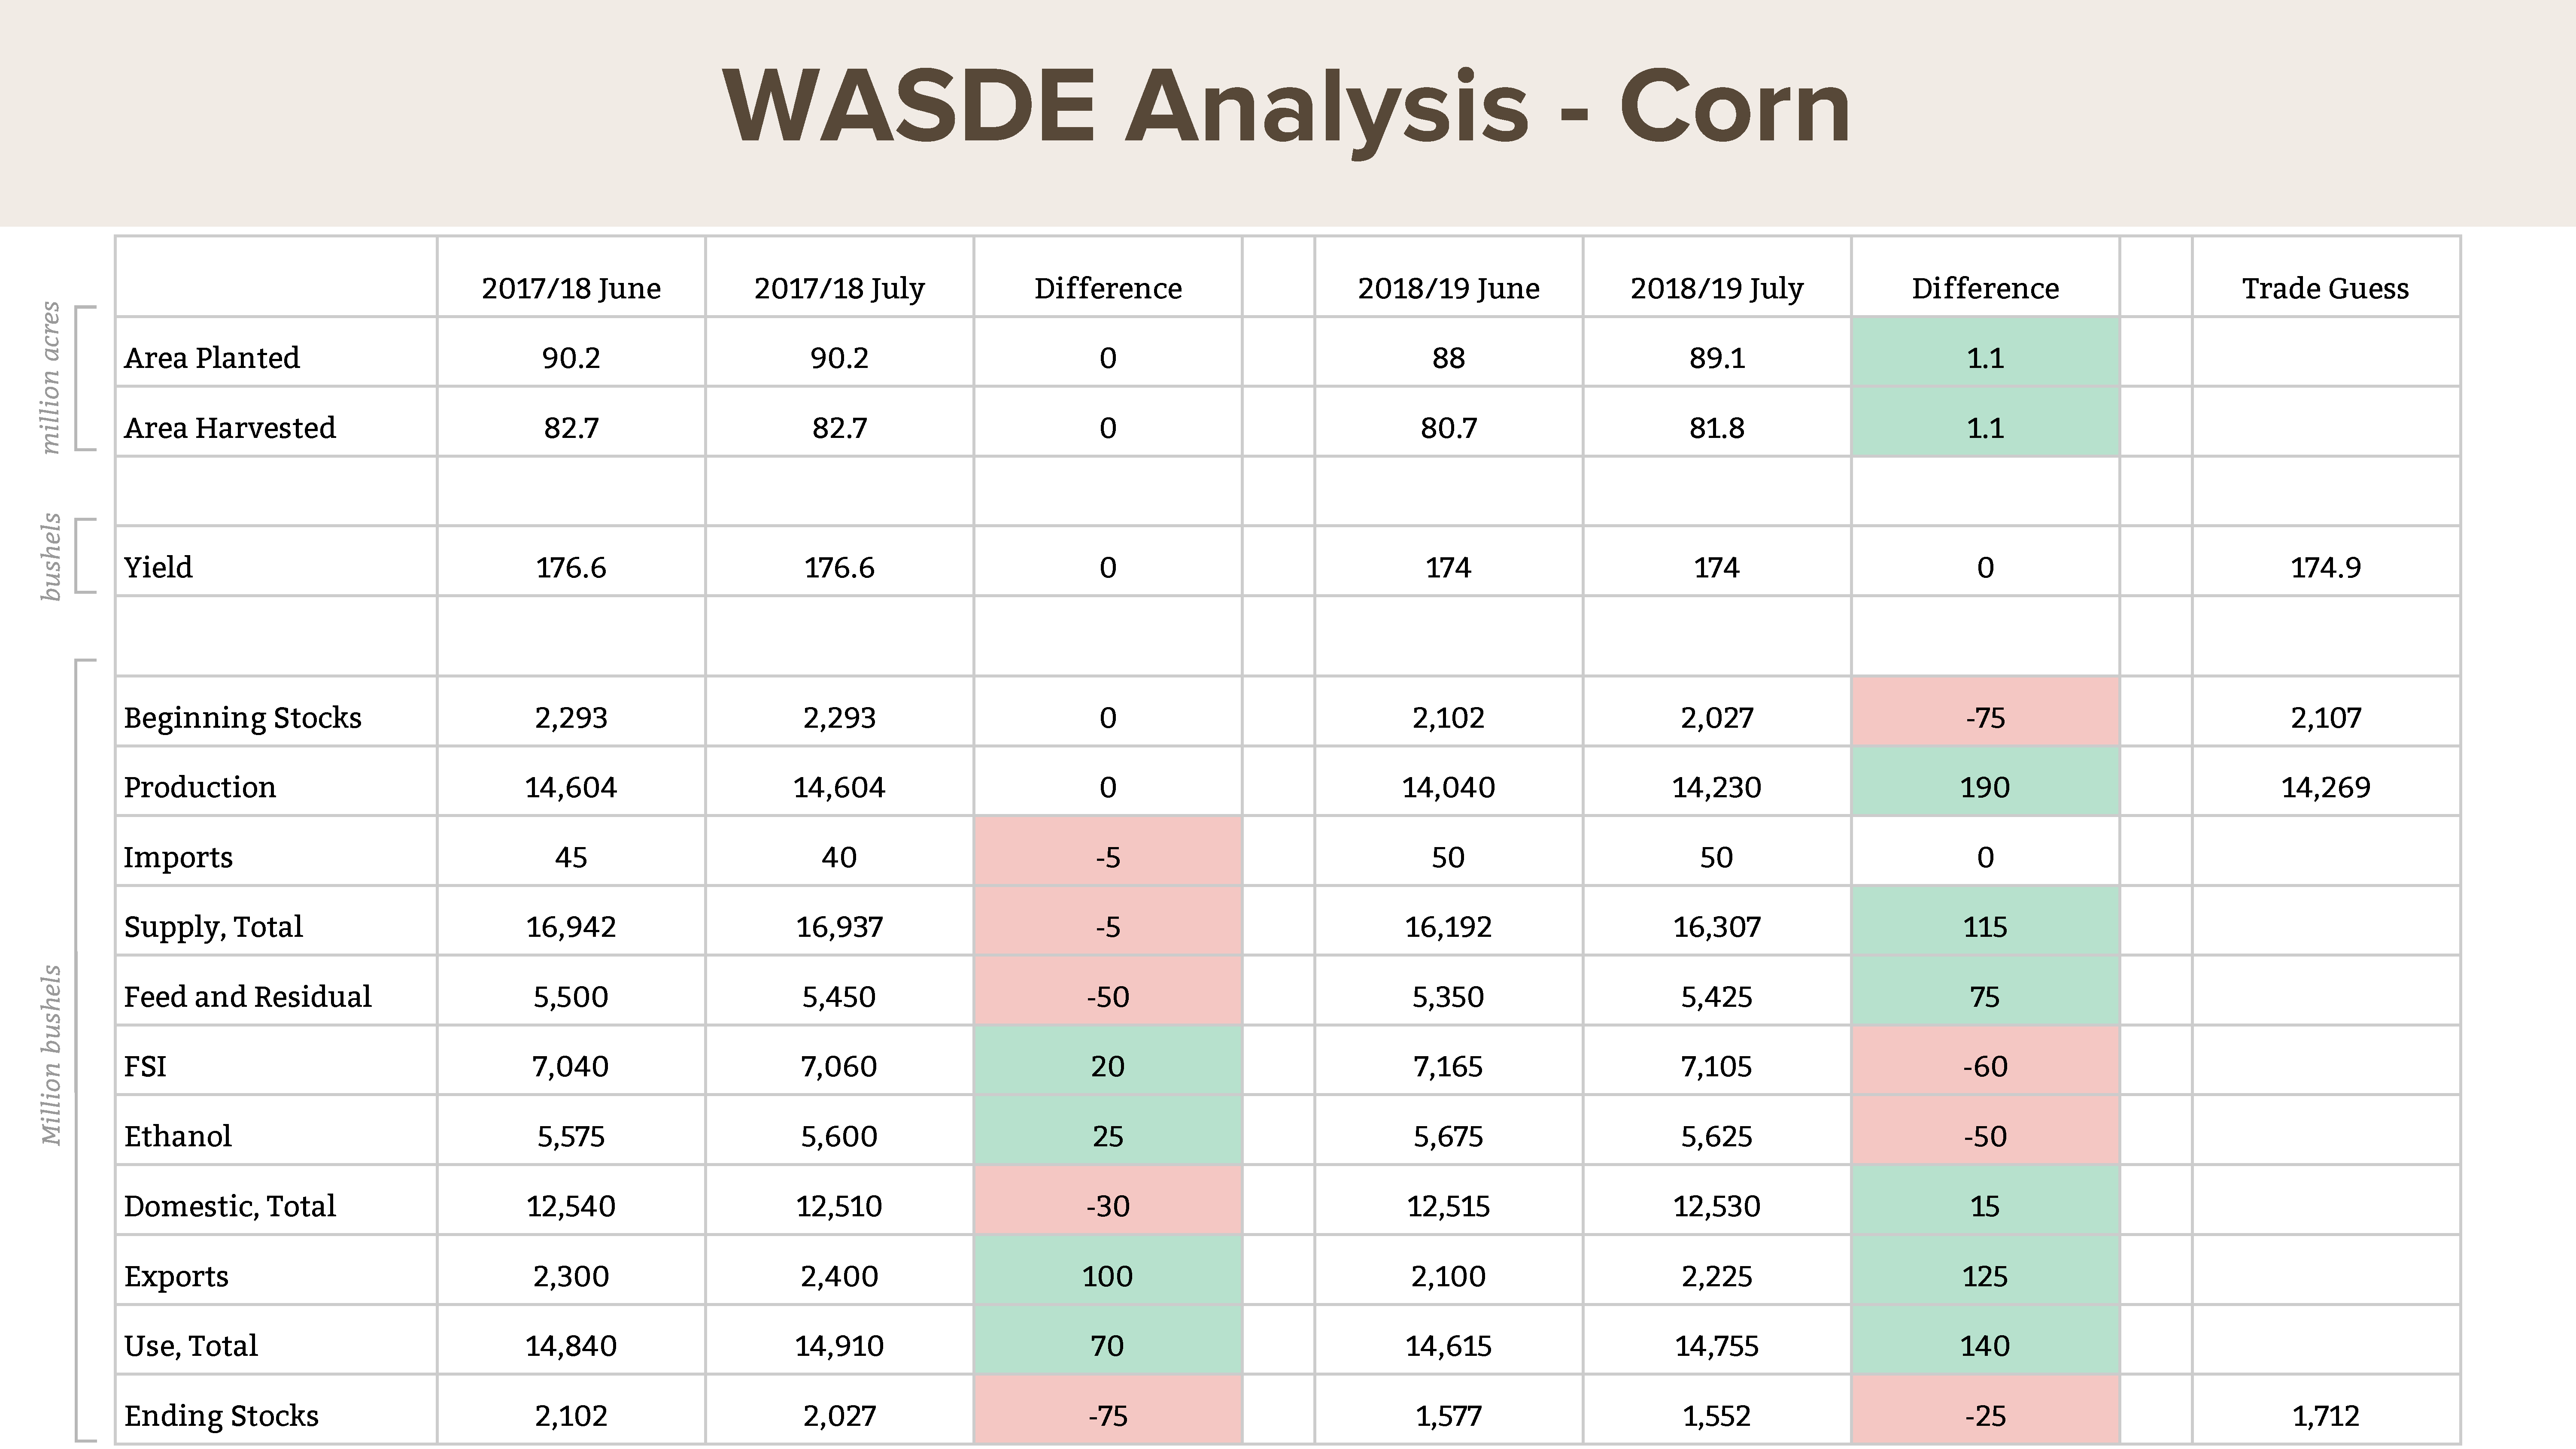 July WASDE: estimated U.S. corn acres planted, harvested, and yield 